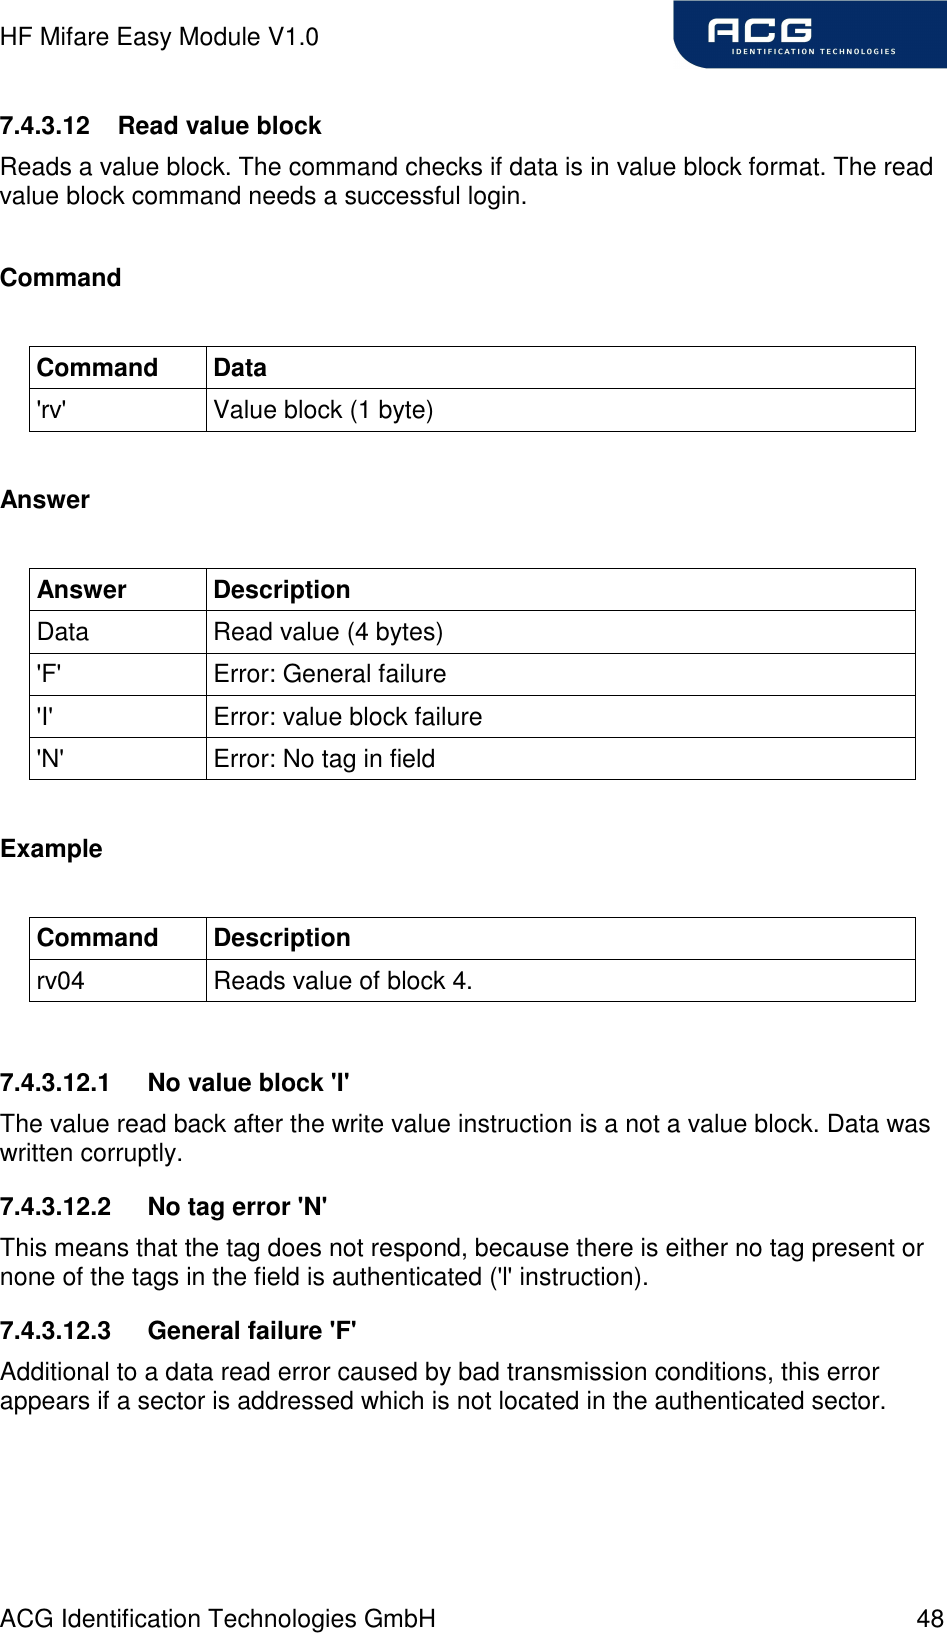 HF Mifare Easy Module V1.0 ACG Identification Technologies GmbH  48 7.4.3.12  Read value block Reads a value block. The command checks if data is in value block format. The read value block command needs a successful login.  Command  Command  Data &apos;rv&apos;  Value block (1 byte)  Answer  Answer  Description Data  Read value (4 bytes) &apos;F&apos;  Error: General failure &apos;I&apos;  Error: value block failure &apos;N&apos;  Error: No tag in field  Example  Command  Description rv04  Reads value of block 4.  7.4.3.12.1  No value block &apos;I&apos; The value read back after the write value instruction is a not a value block. Data was written corruptly. 7.4.3.12.2  No tag error &apos;N&apos; This means that the tag does not respond, because there is either no tag present or none of the tags in the field is authenticated (&apos;l&apos; instruction). 7.4.3.12.3  General failure &apos;F&apos; Additional to a data read error caused by bad transmission conditions, this error appears if a sector is addressed which is not located in the authenticated sector.  